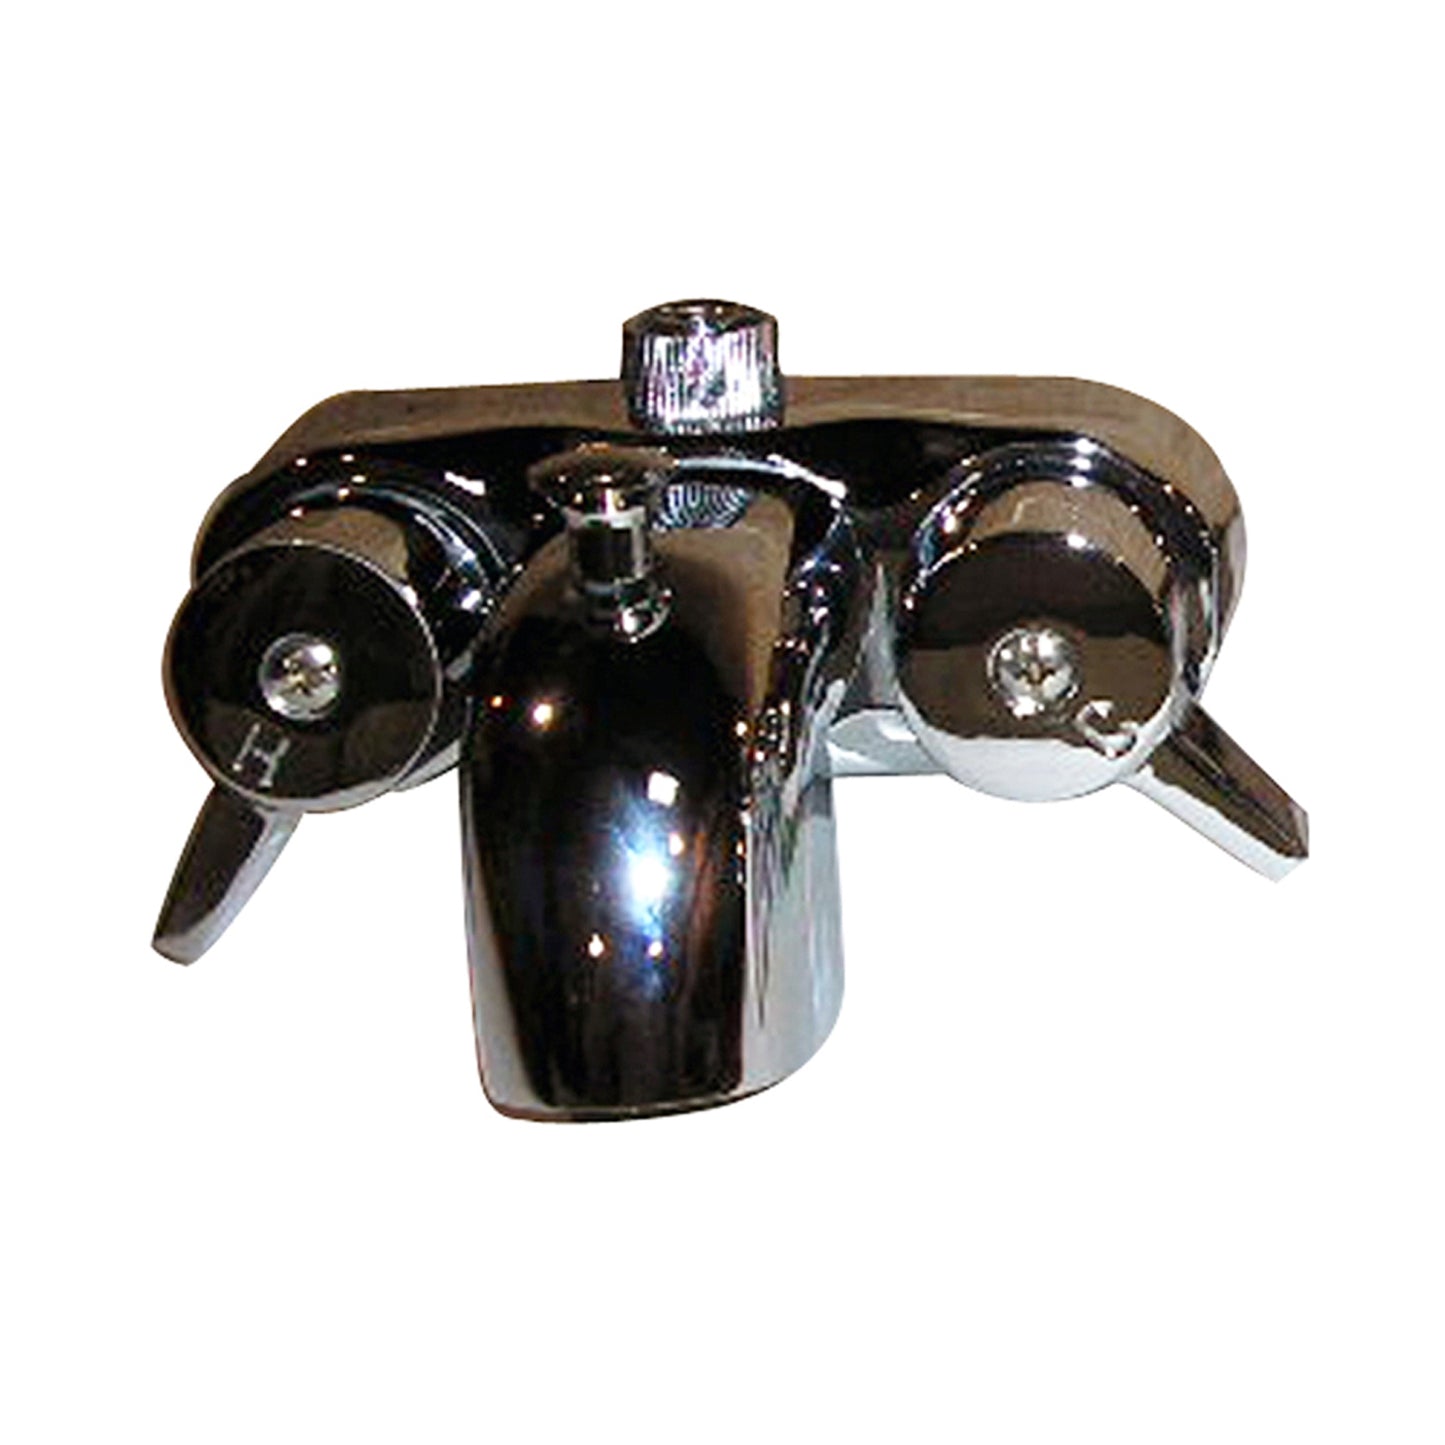 Basic Tub Faucet Kit with 48" x 24" Rod & Shower Head in Polished Chrome